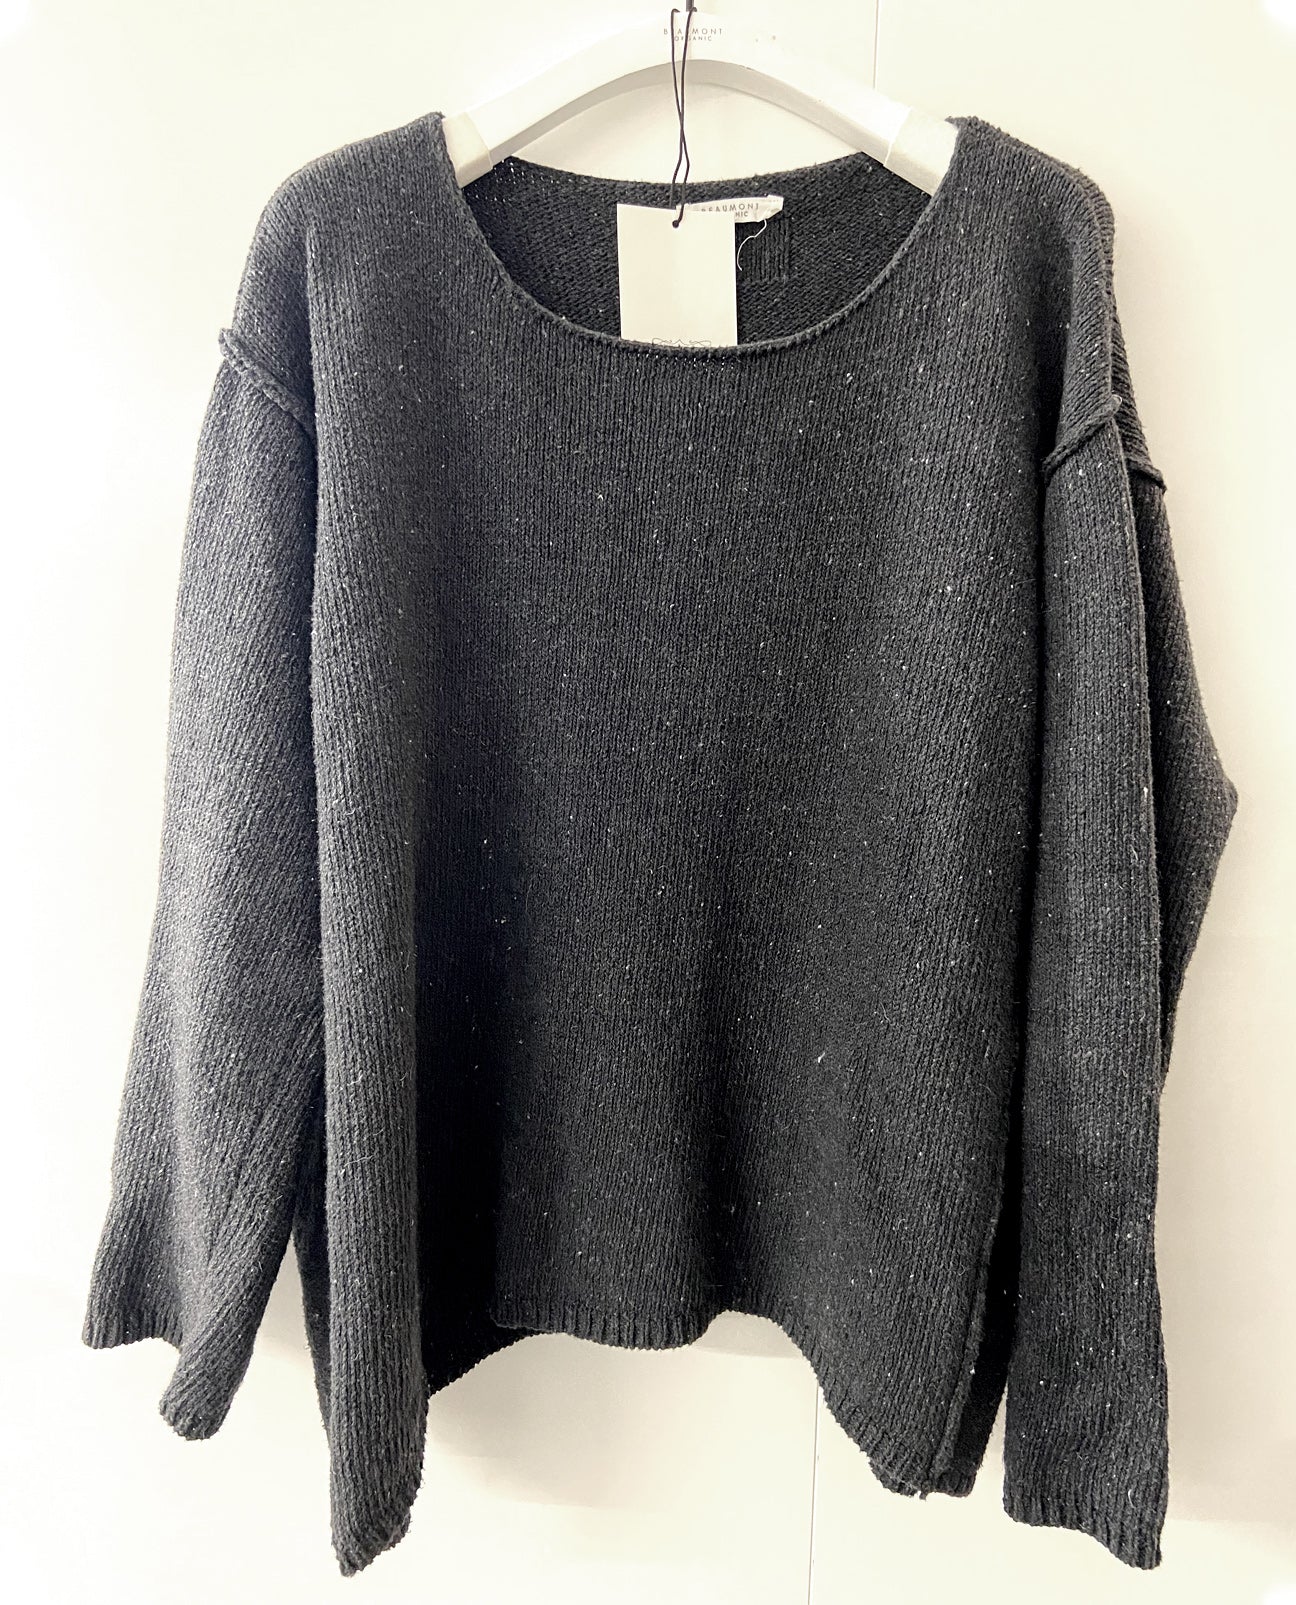 Alessandra Recycled Cotton Jumper in Washed Black S